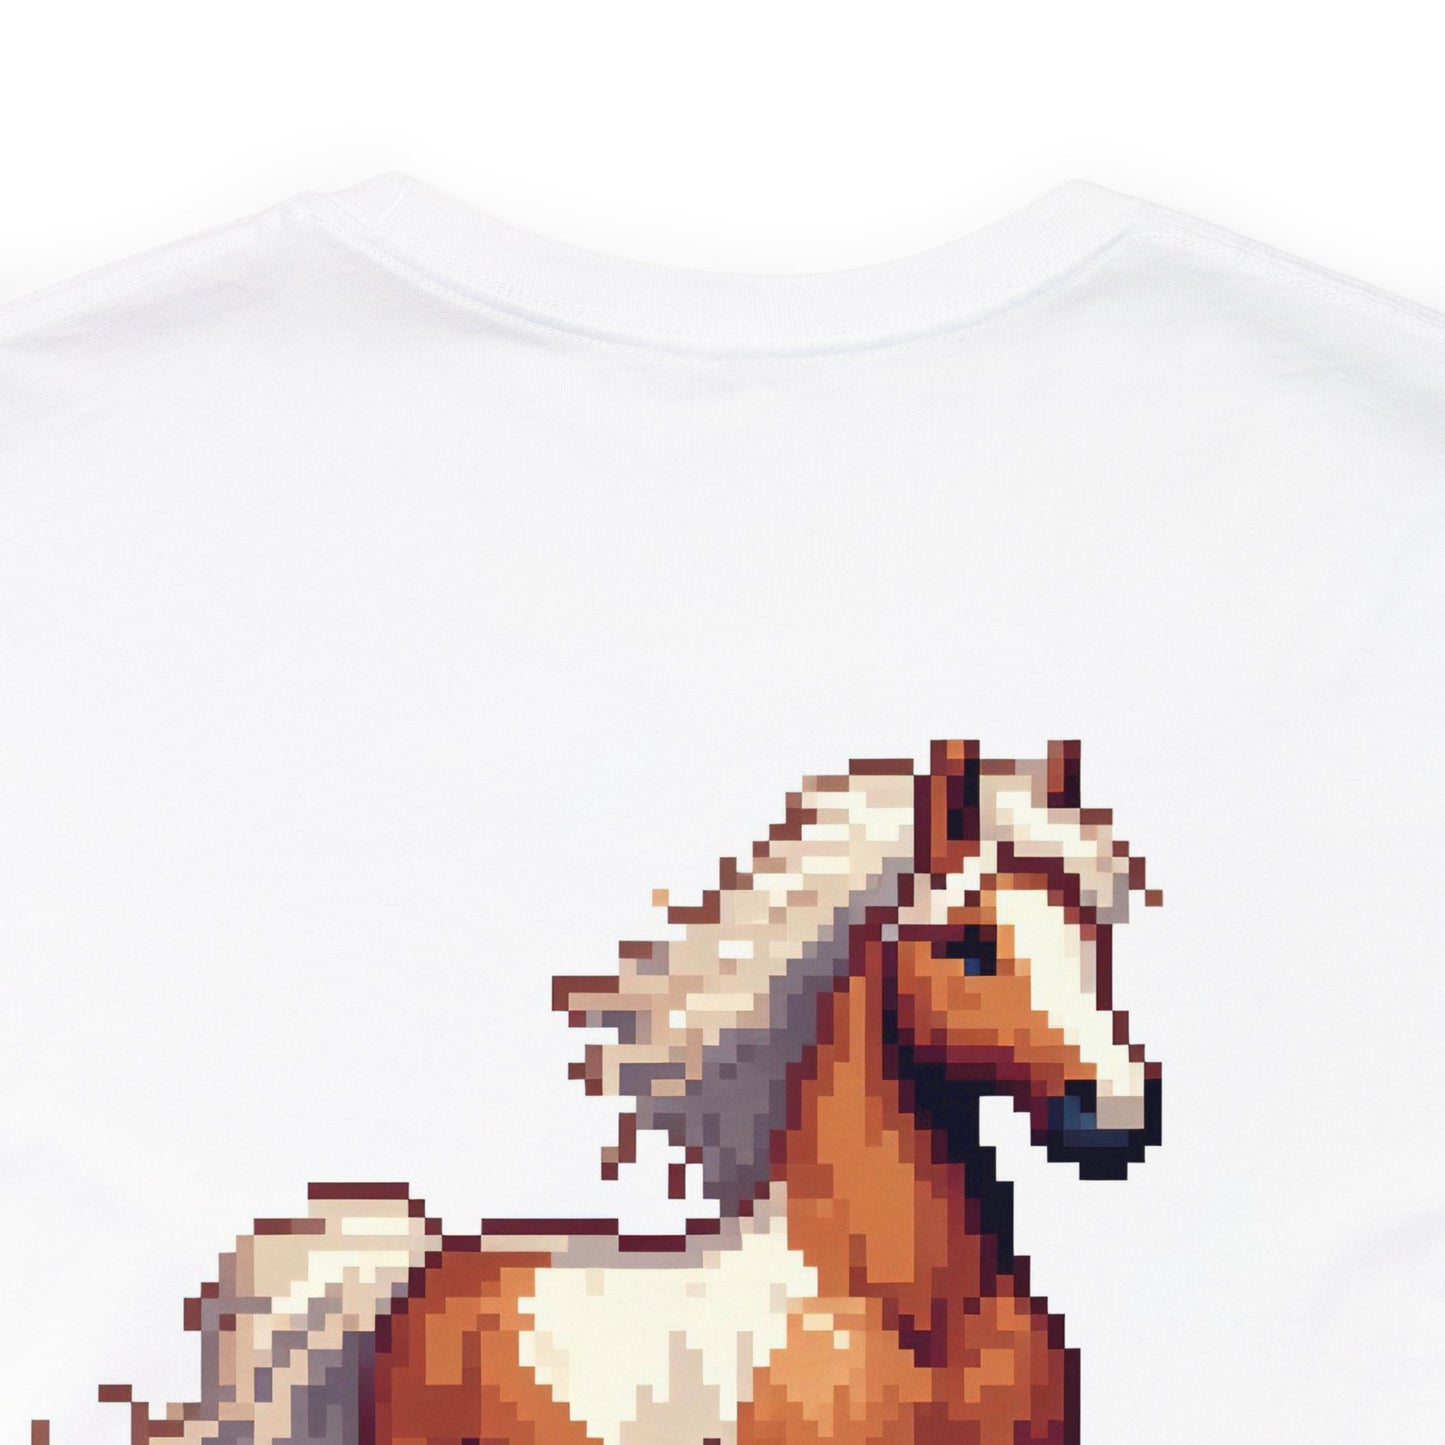 Unisex Jersey Short Sleeve Tee - Play the Game Horses